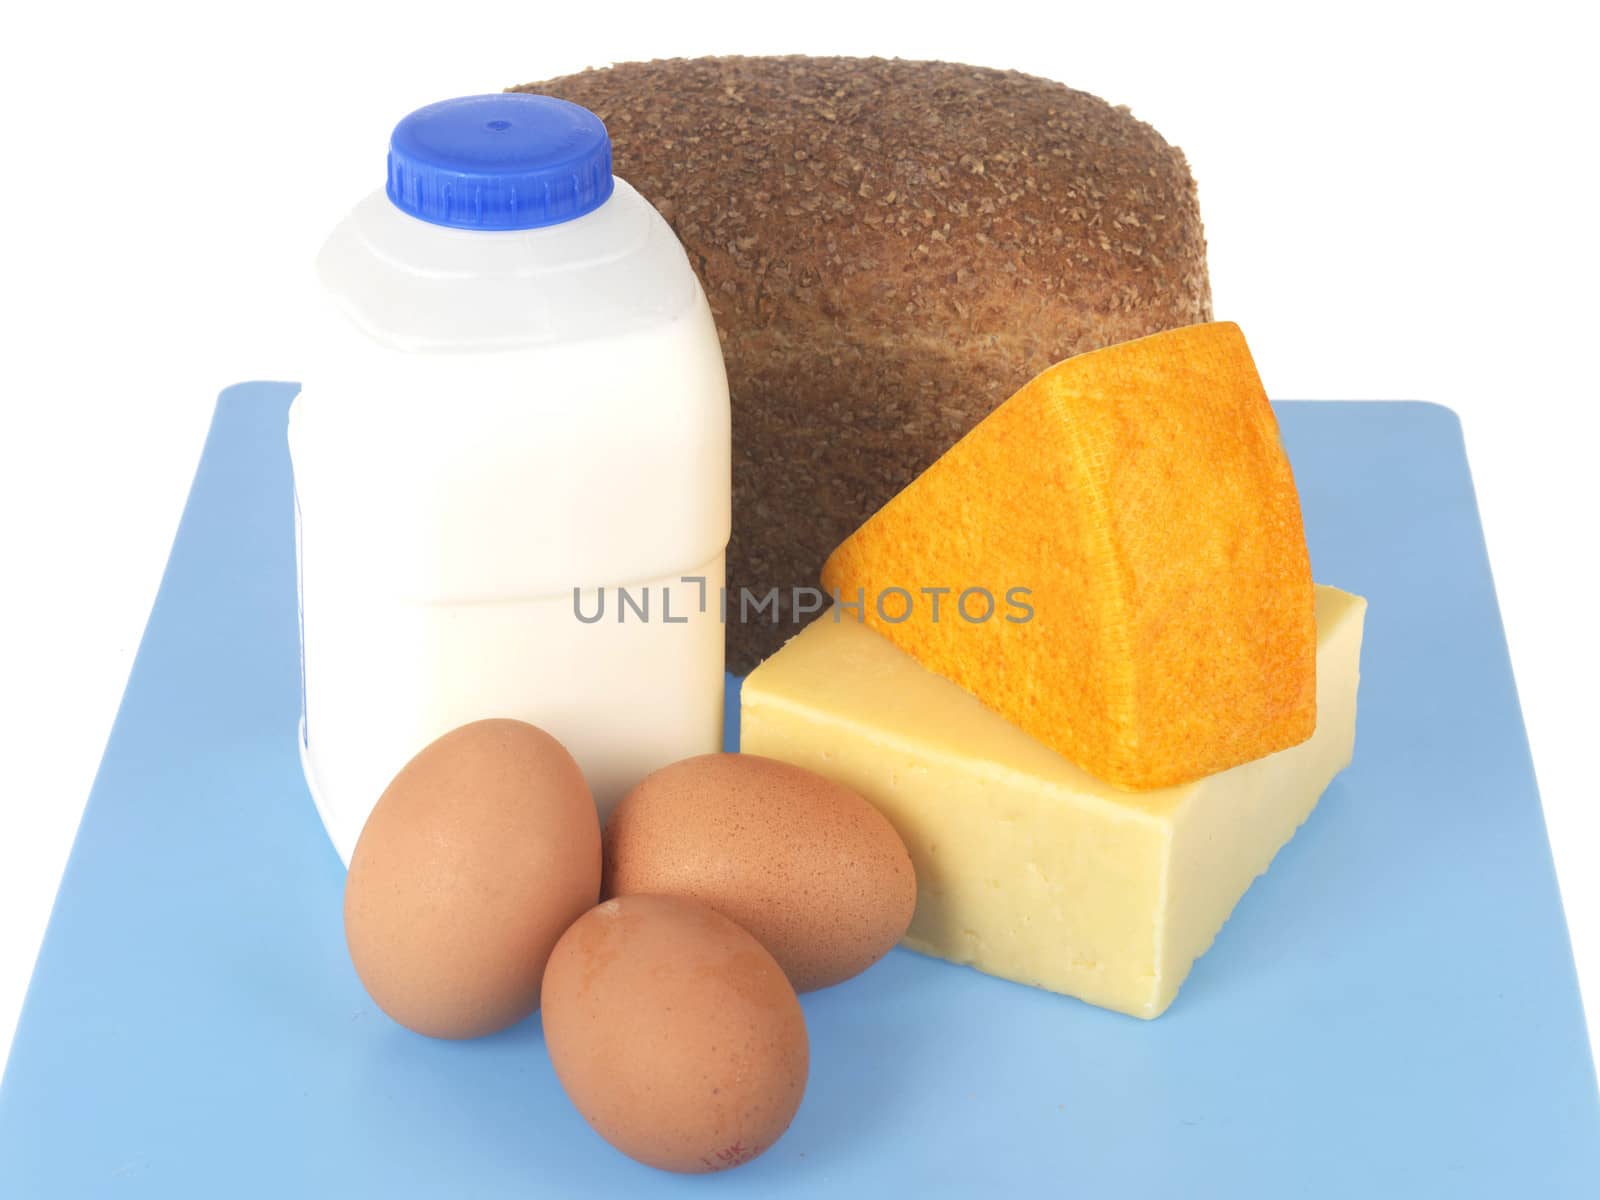 Milk Cheese Eggs and Bread by Whiteboxmedia